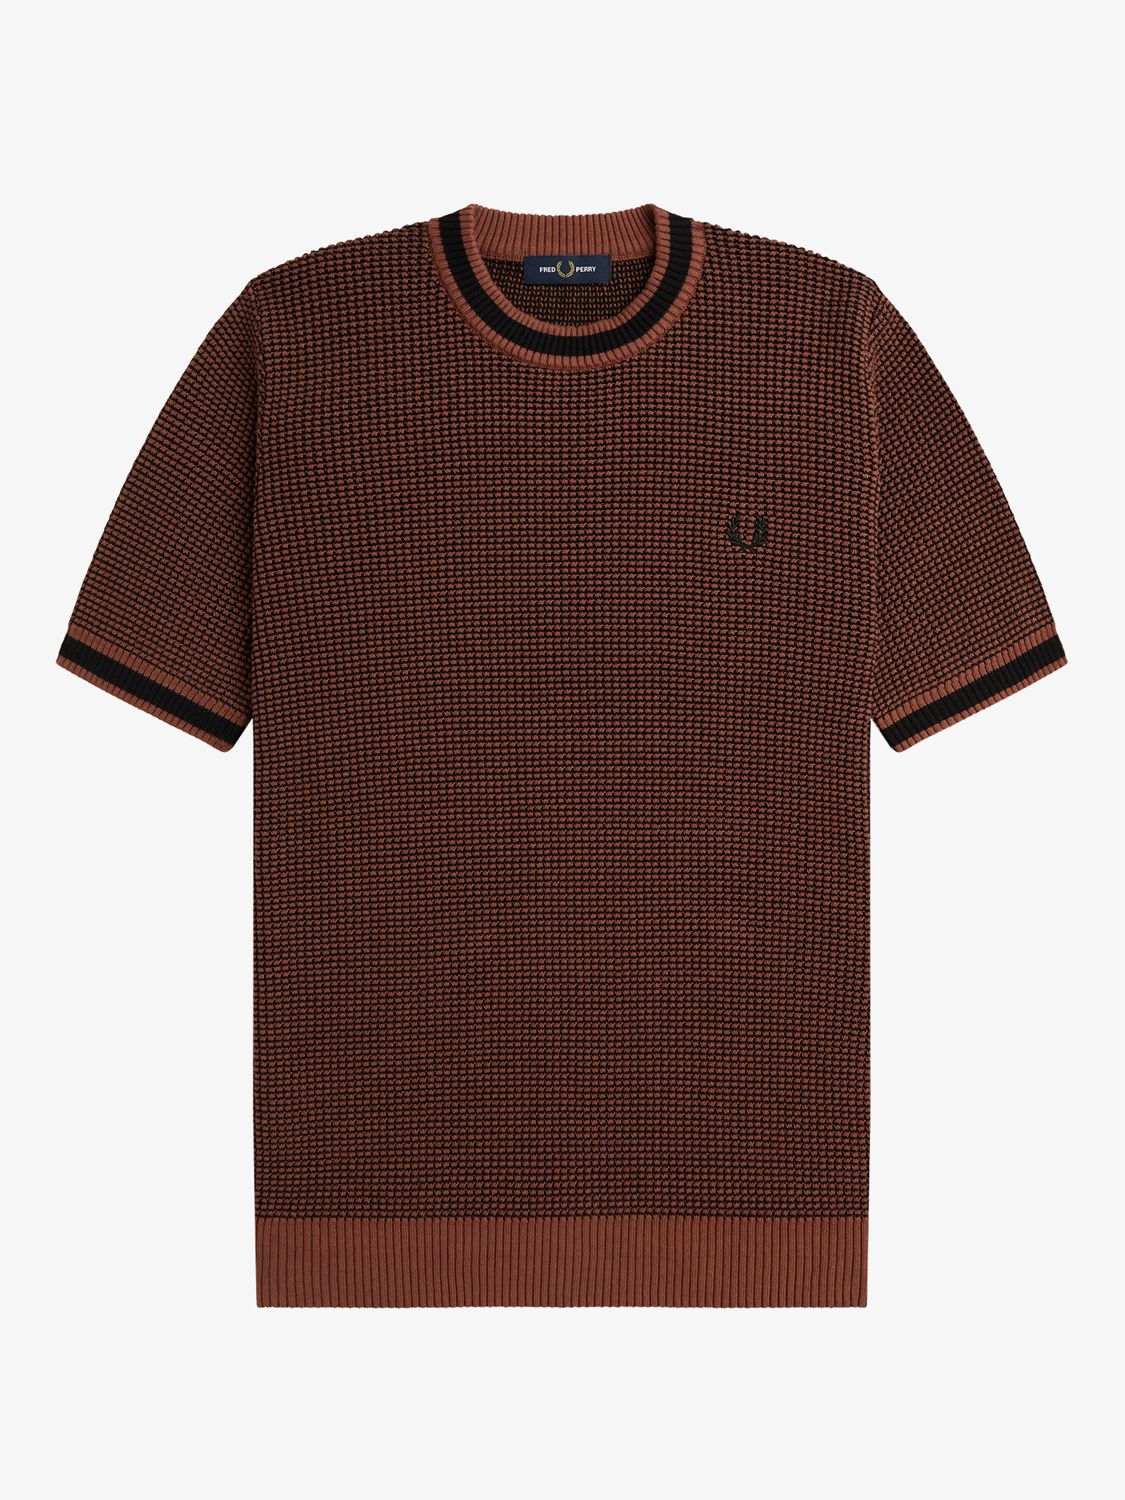 Fred Perry Stripe Knitted Cotton T-Shirt, Whiskey Brown, XL